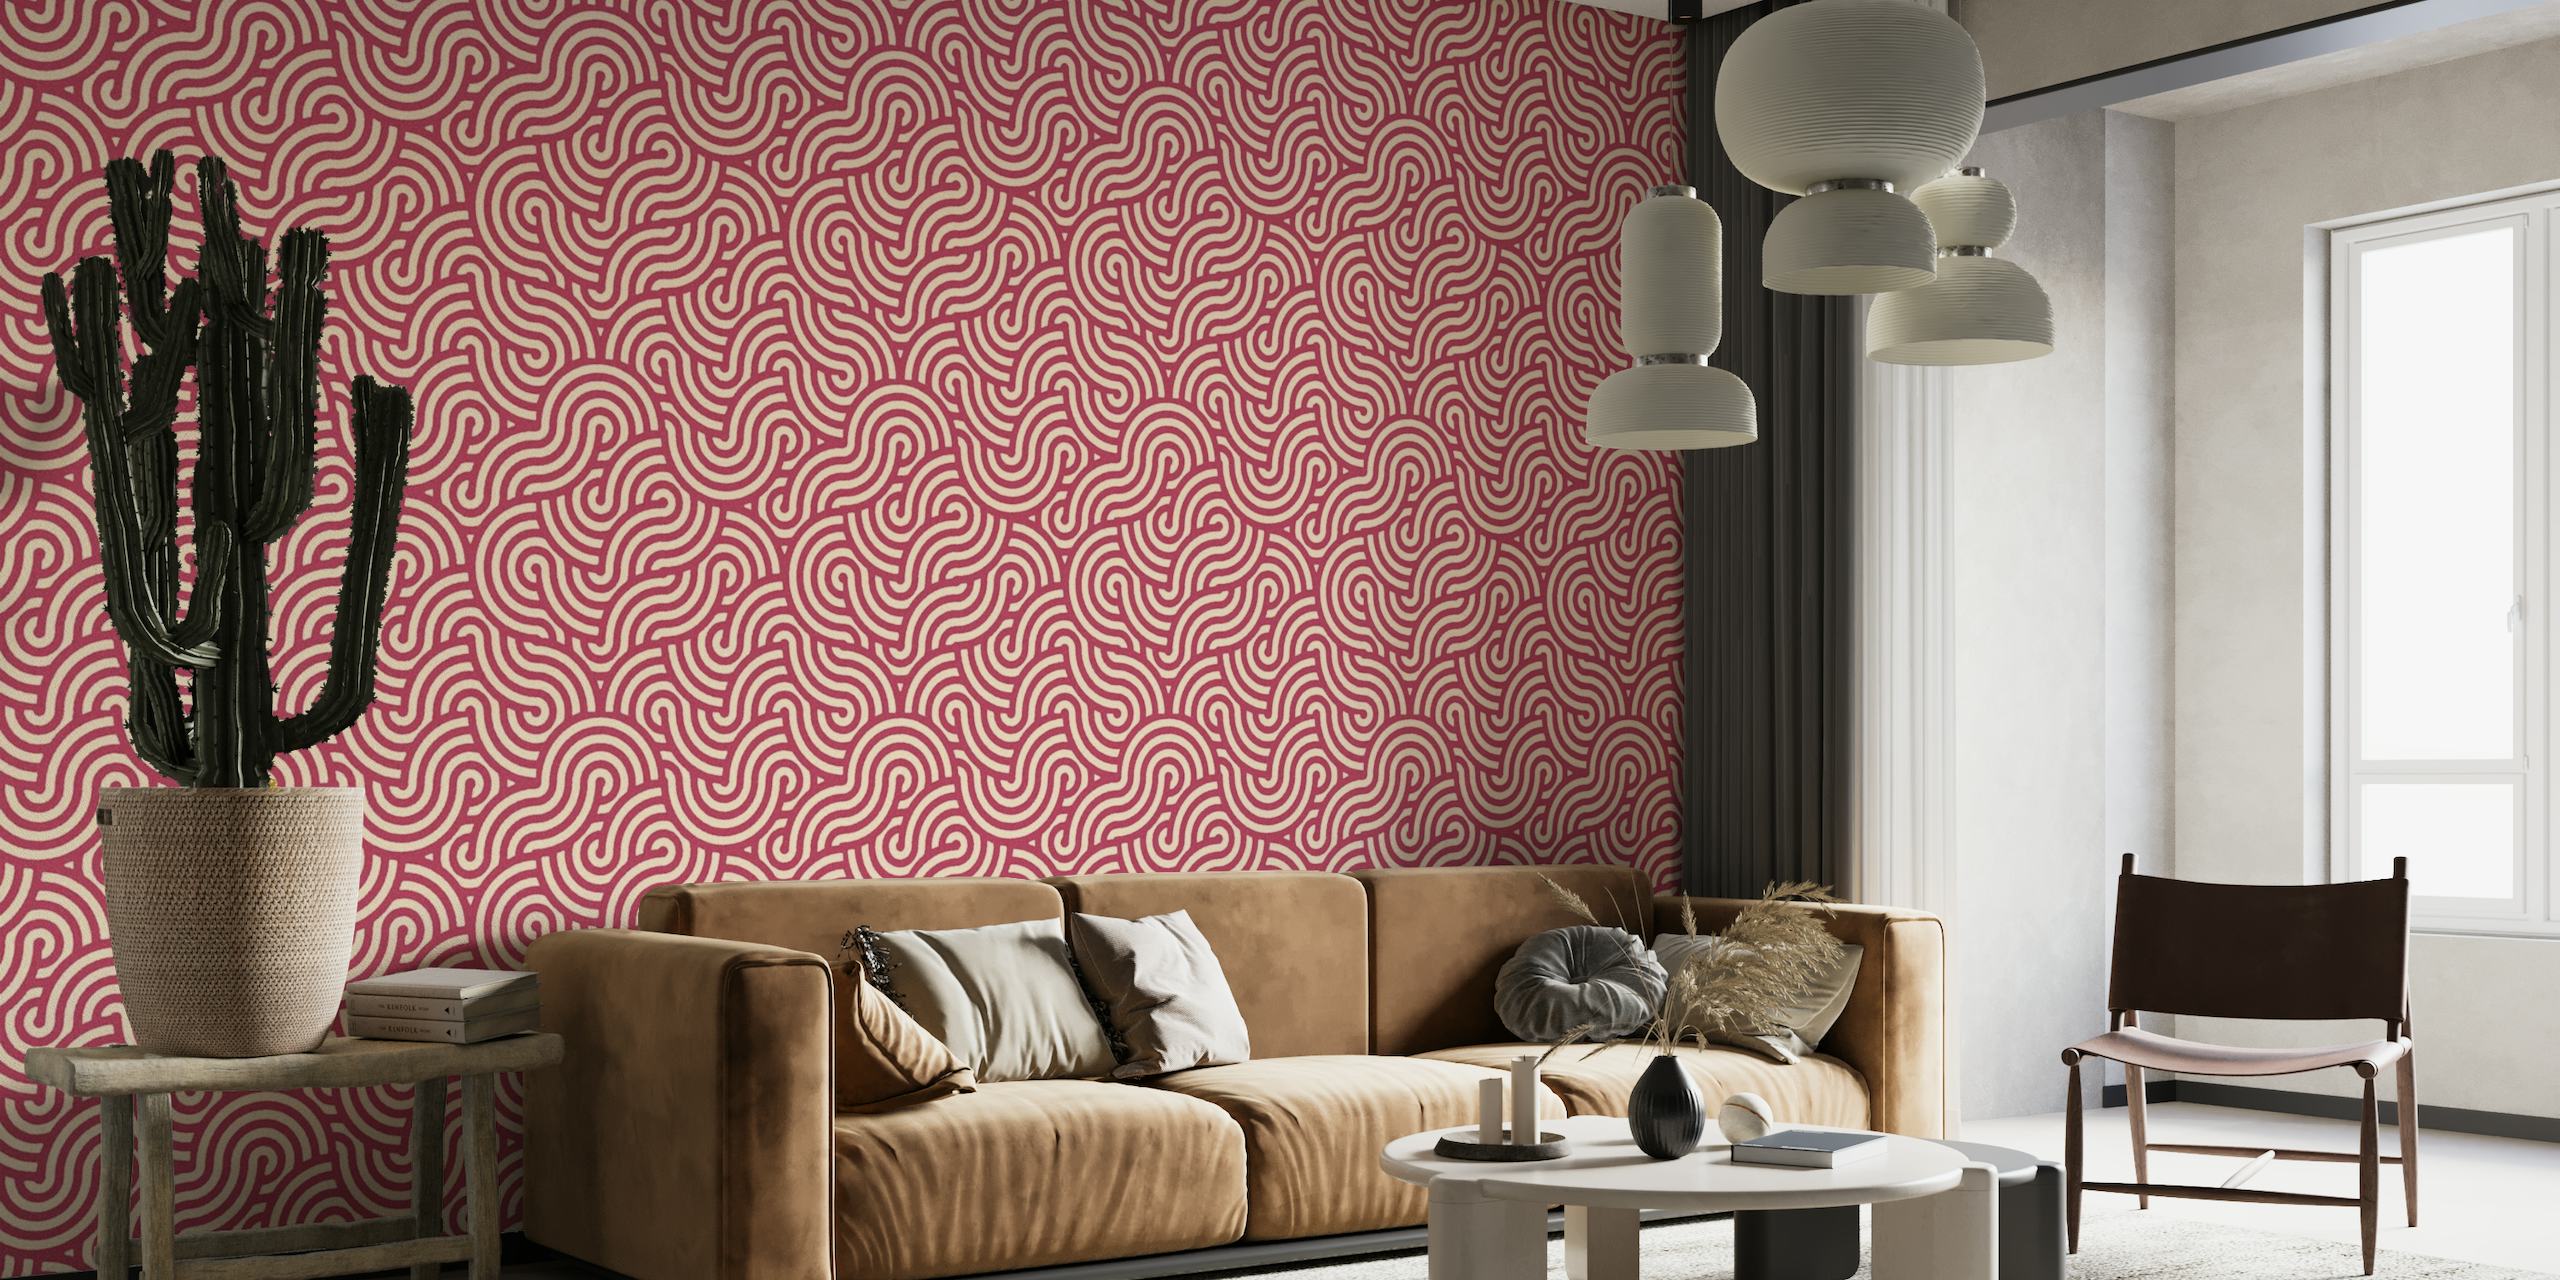 Abstract SWIRL Onion and Almond pattern wall mural